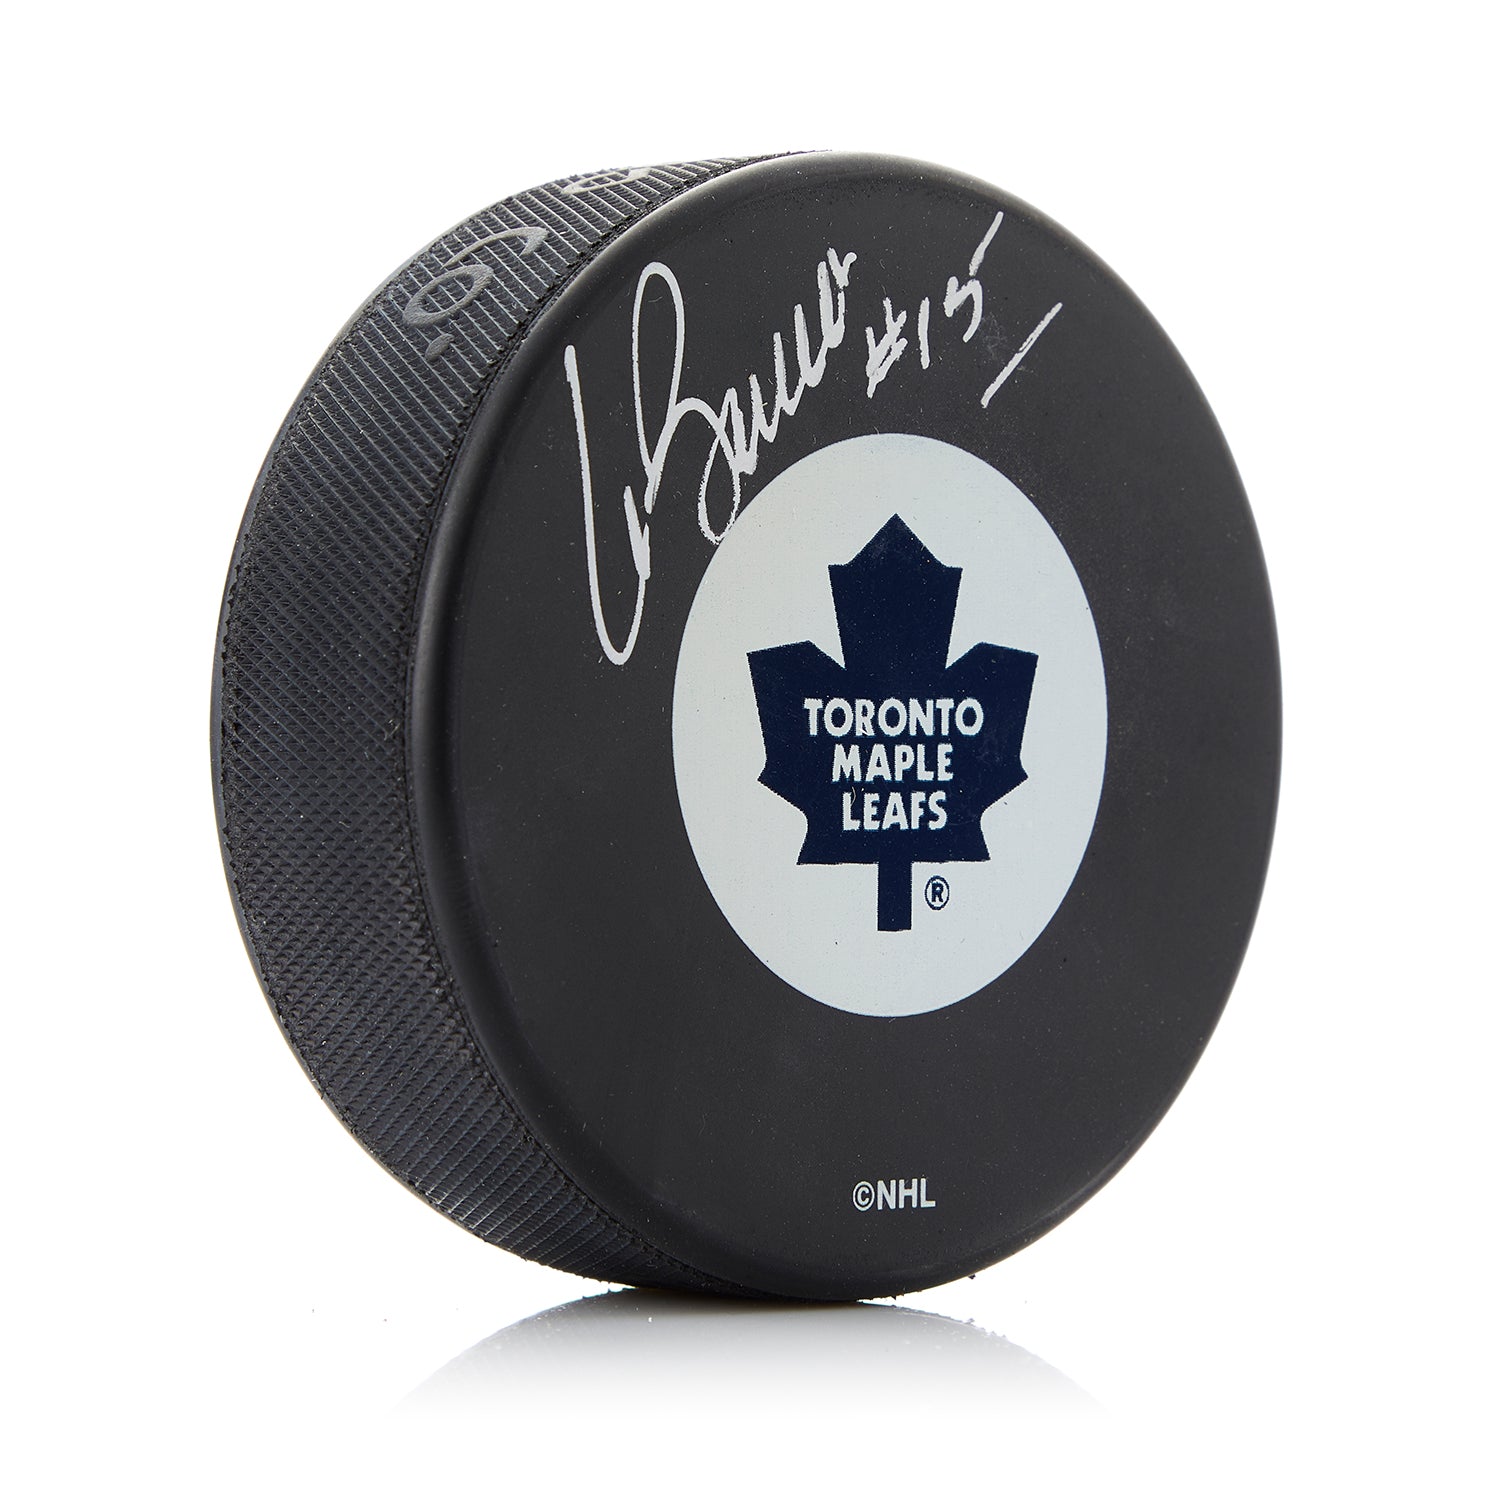 Pat Boutette Toronto Maple Leafs Autographed Hockey Puck